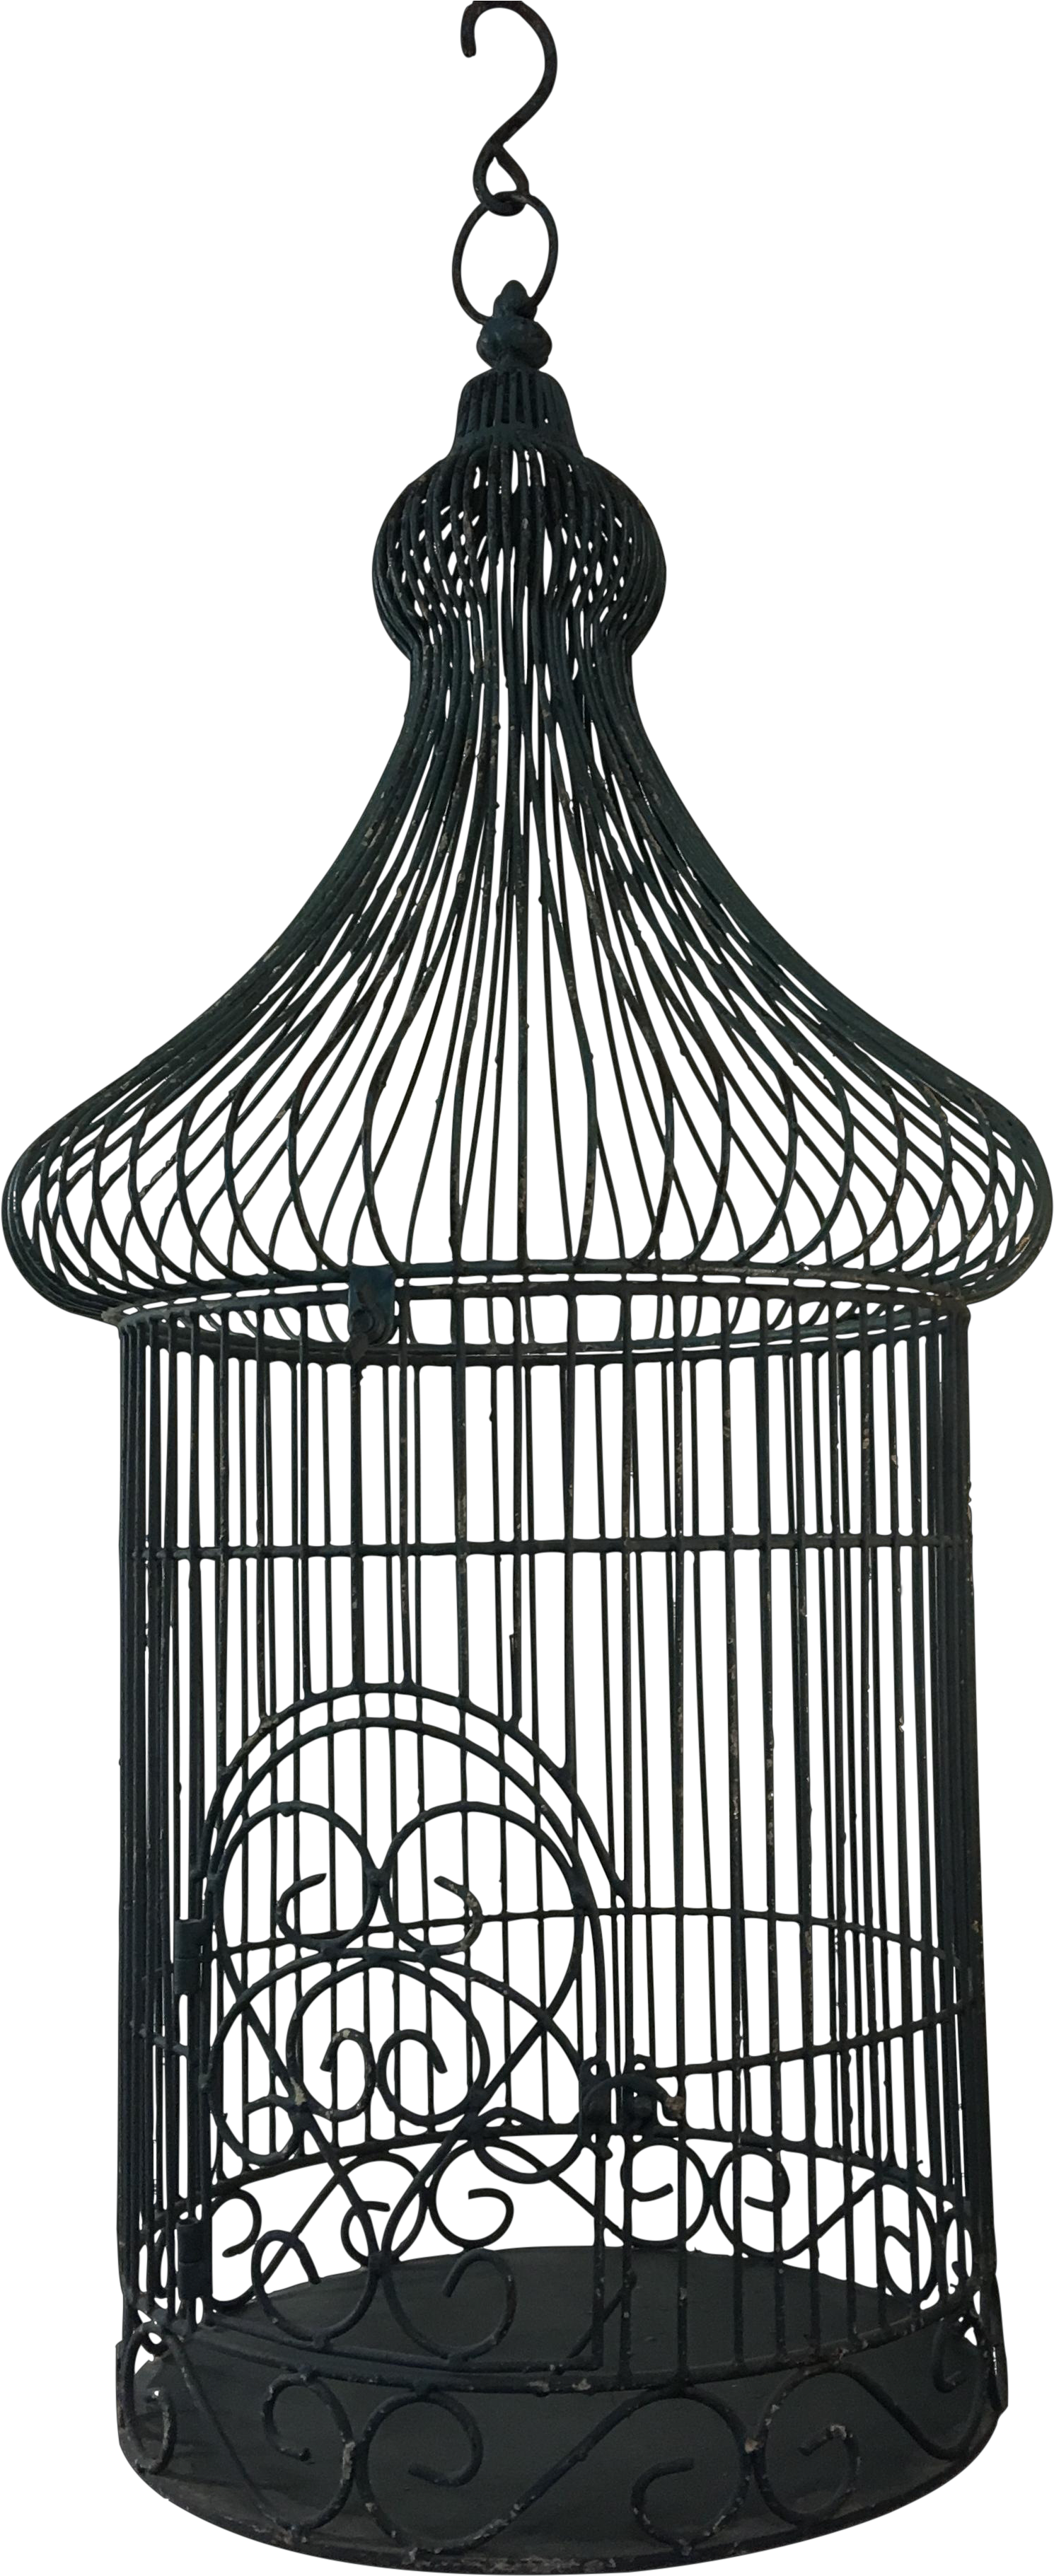 A Black Bird Cage With A Black Background